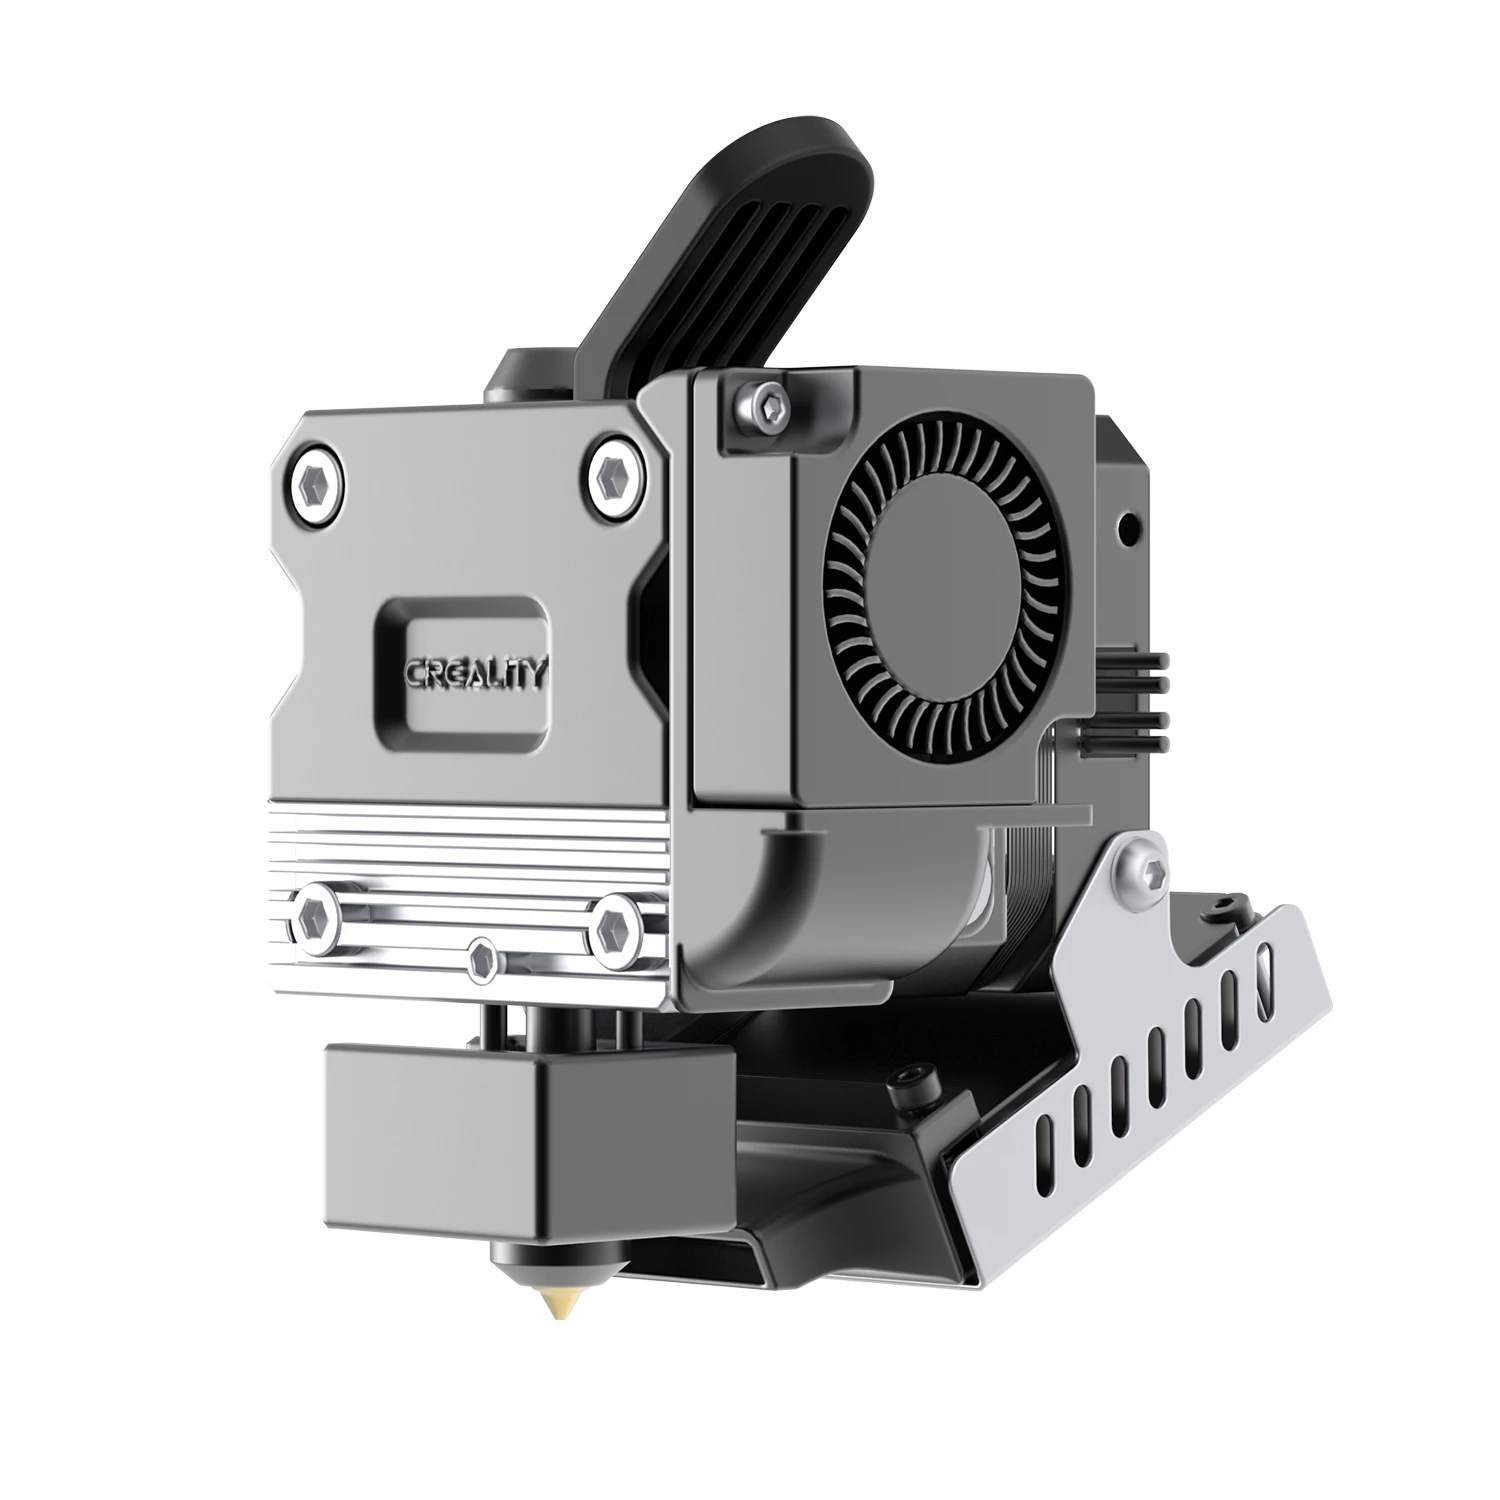 printhead for printer CREALITY 3D Original Ender-3 S1 Standard Sprite Extruder 3.5:1 Gear Ratio Dual Gear Direct Bowden Extrusion for Ender-3 S1 synchronous belt